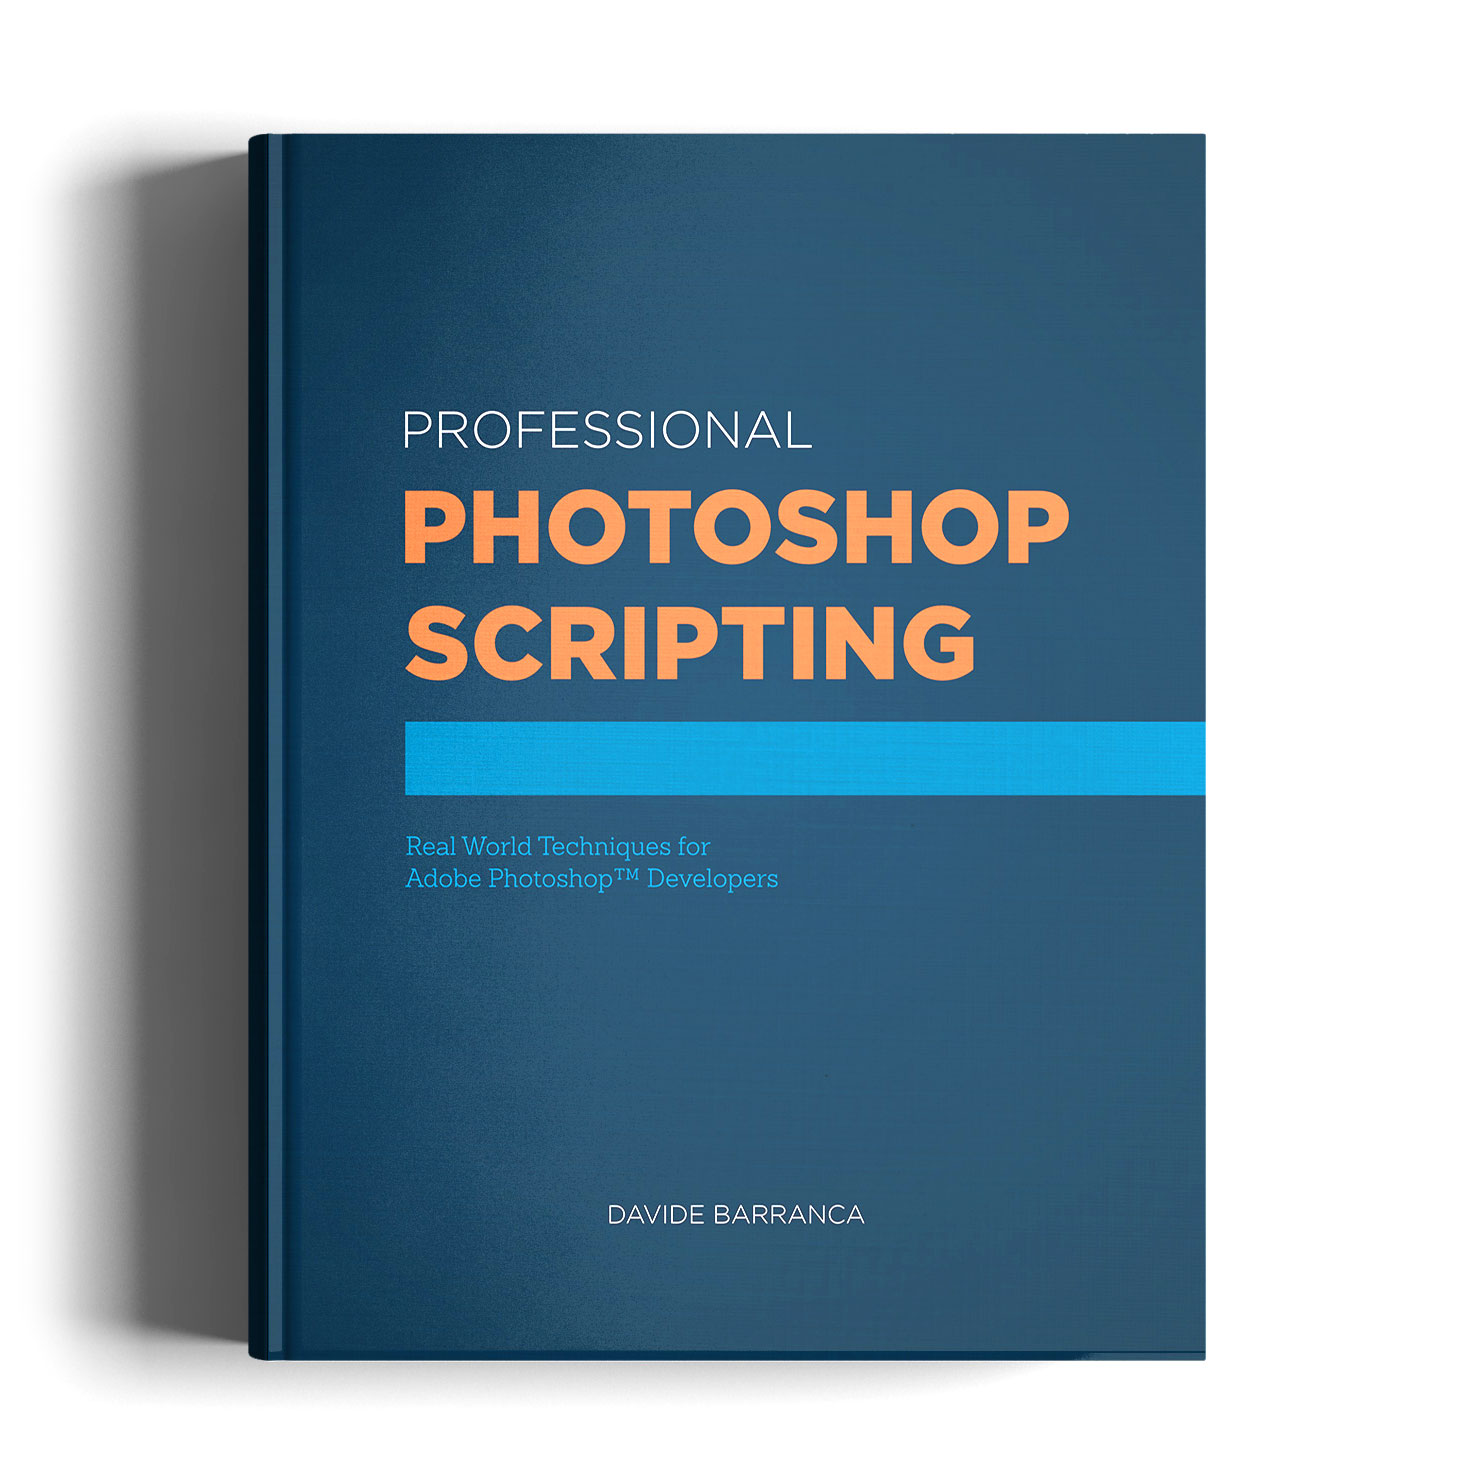 Professional Photoshop Scripting book cover